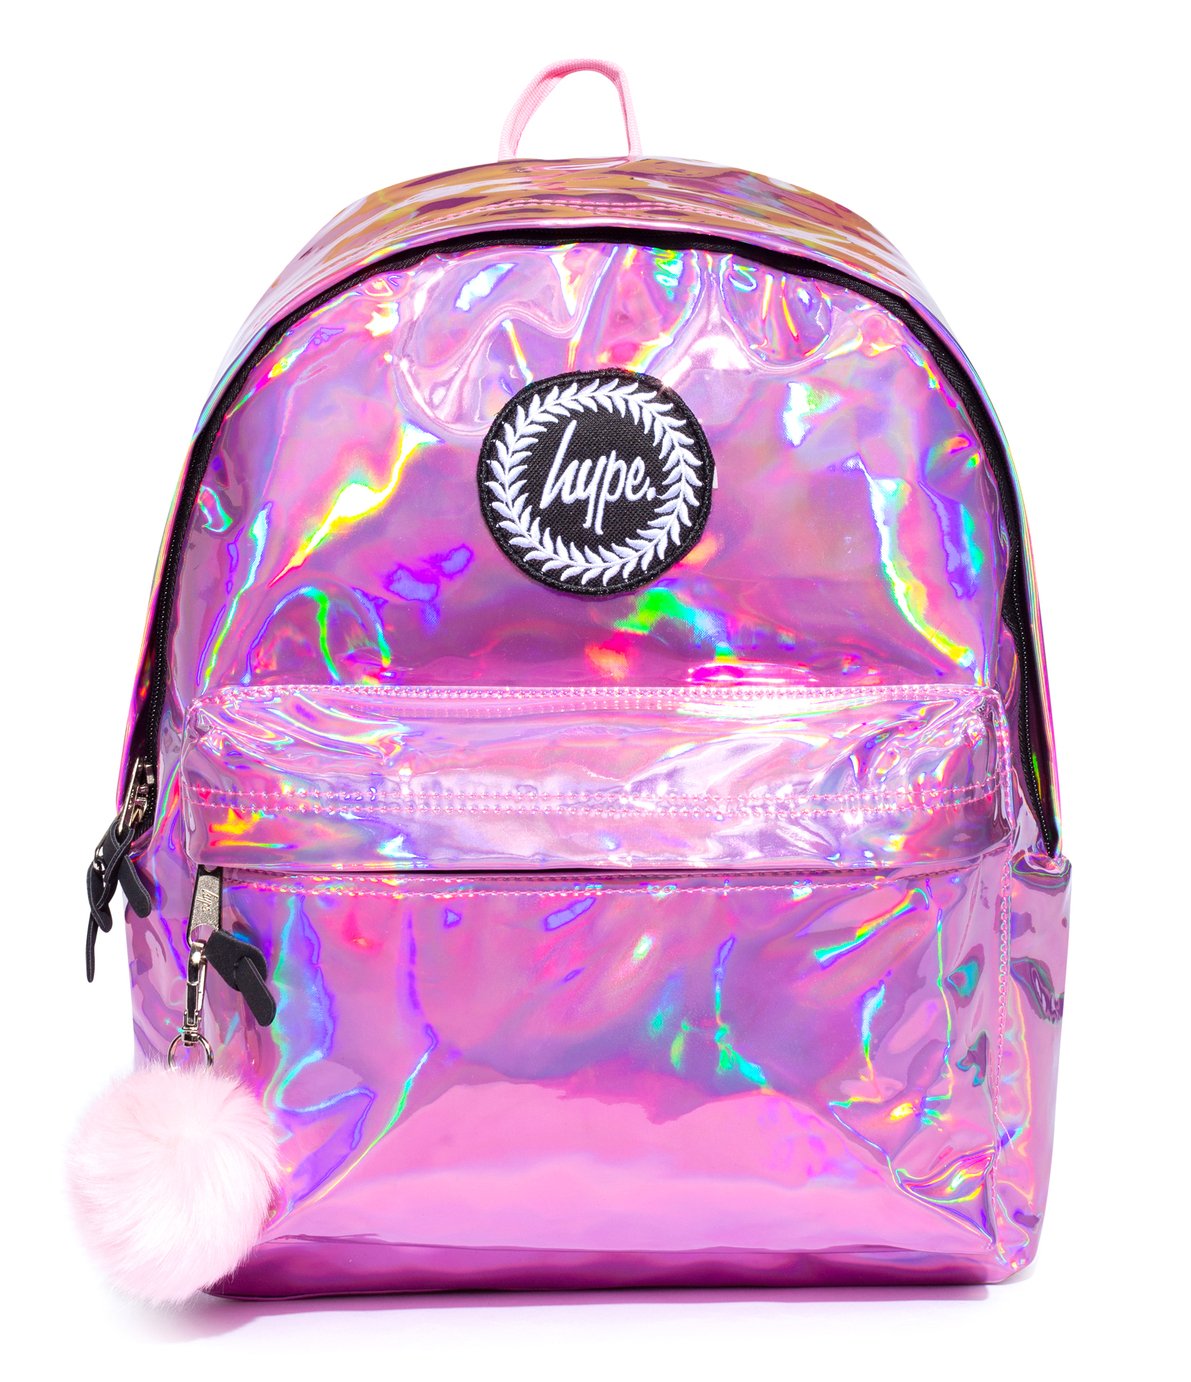 Hype Holographic 18L Backpack Review